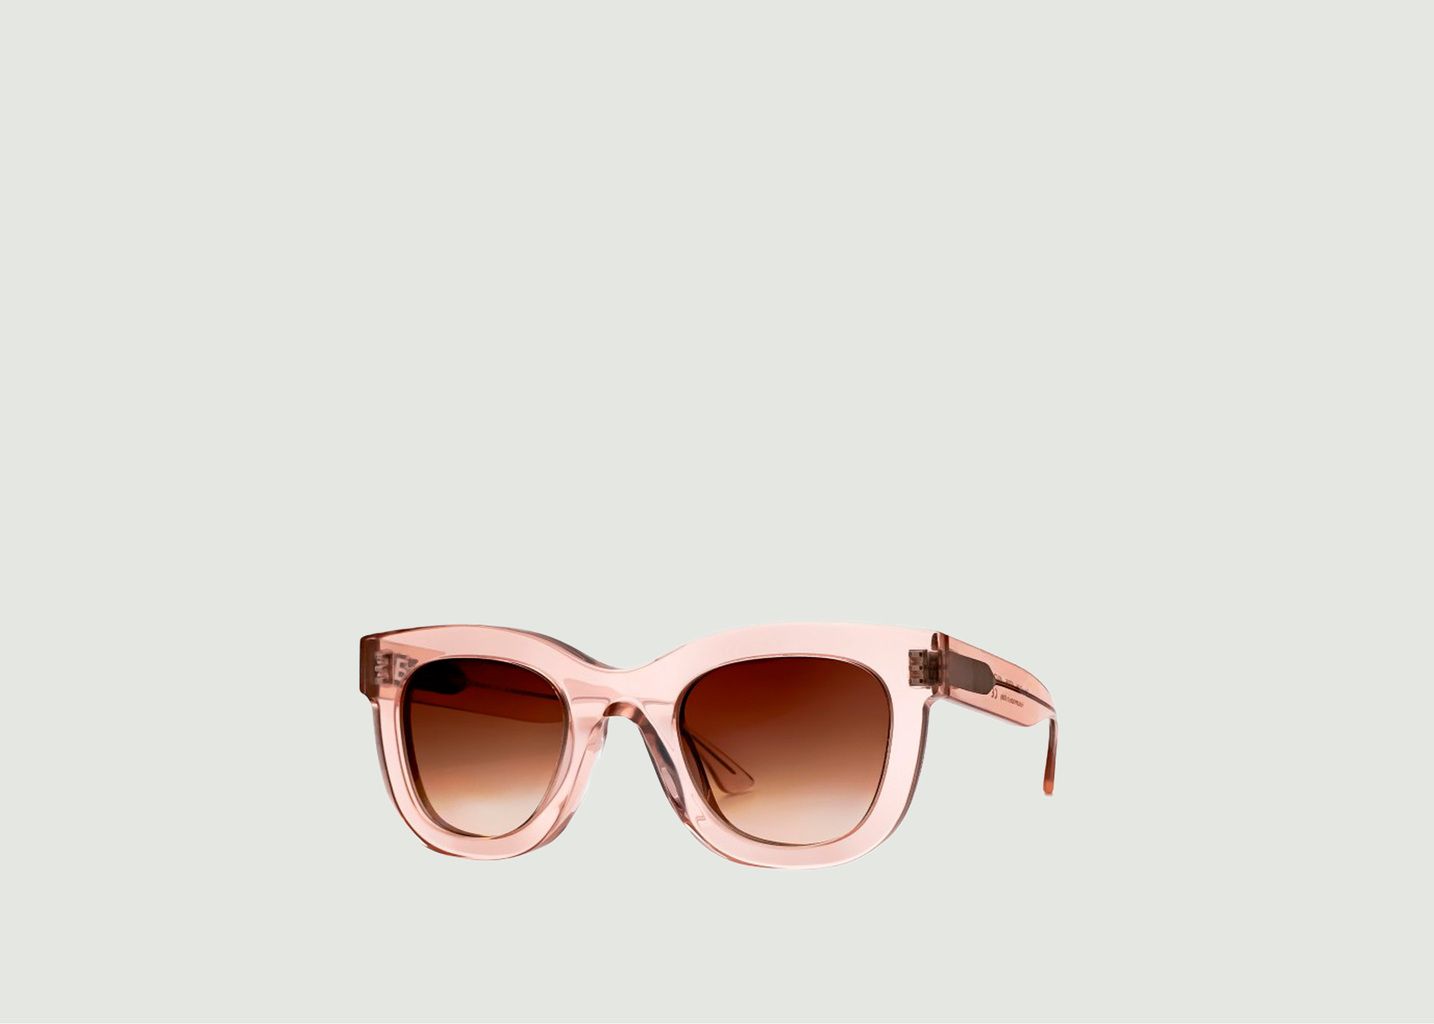 Lunettes de soleil Gambly - Thierry Lasry